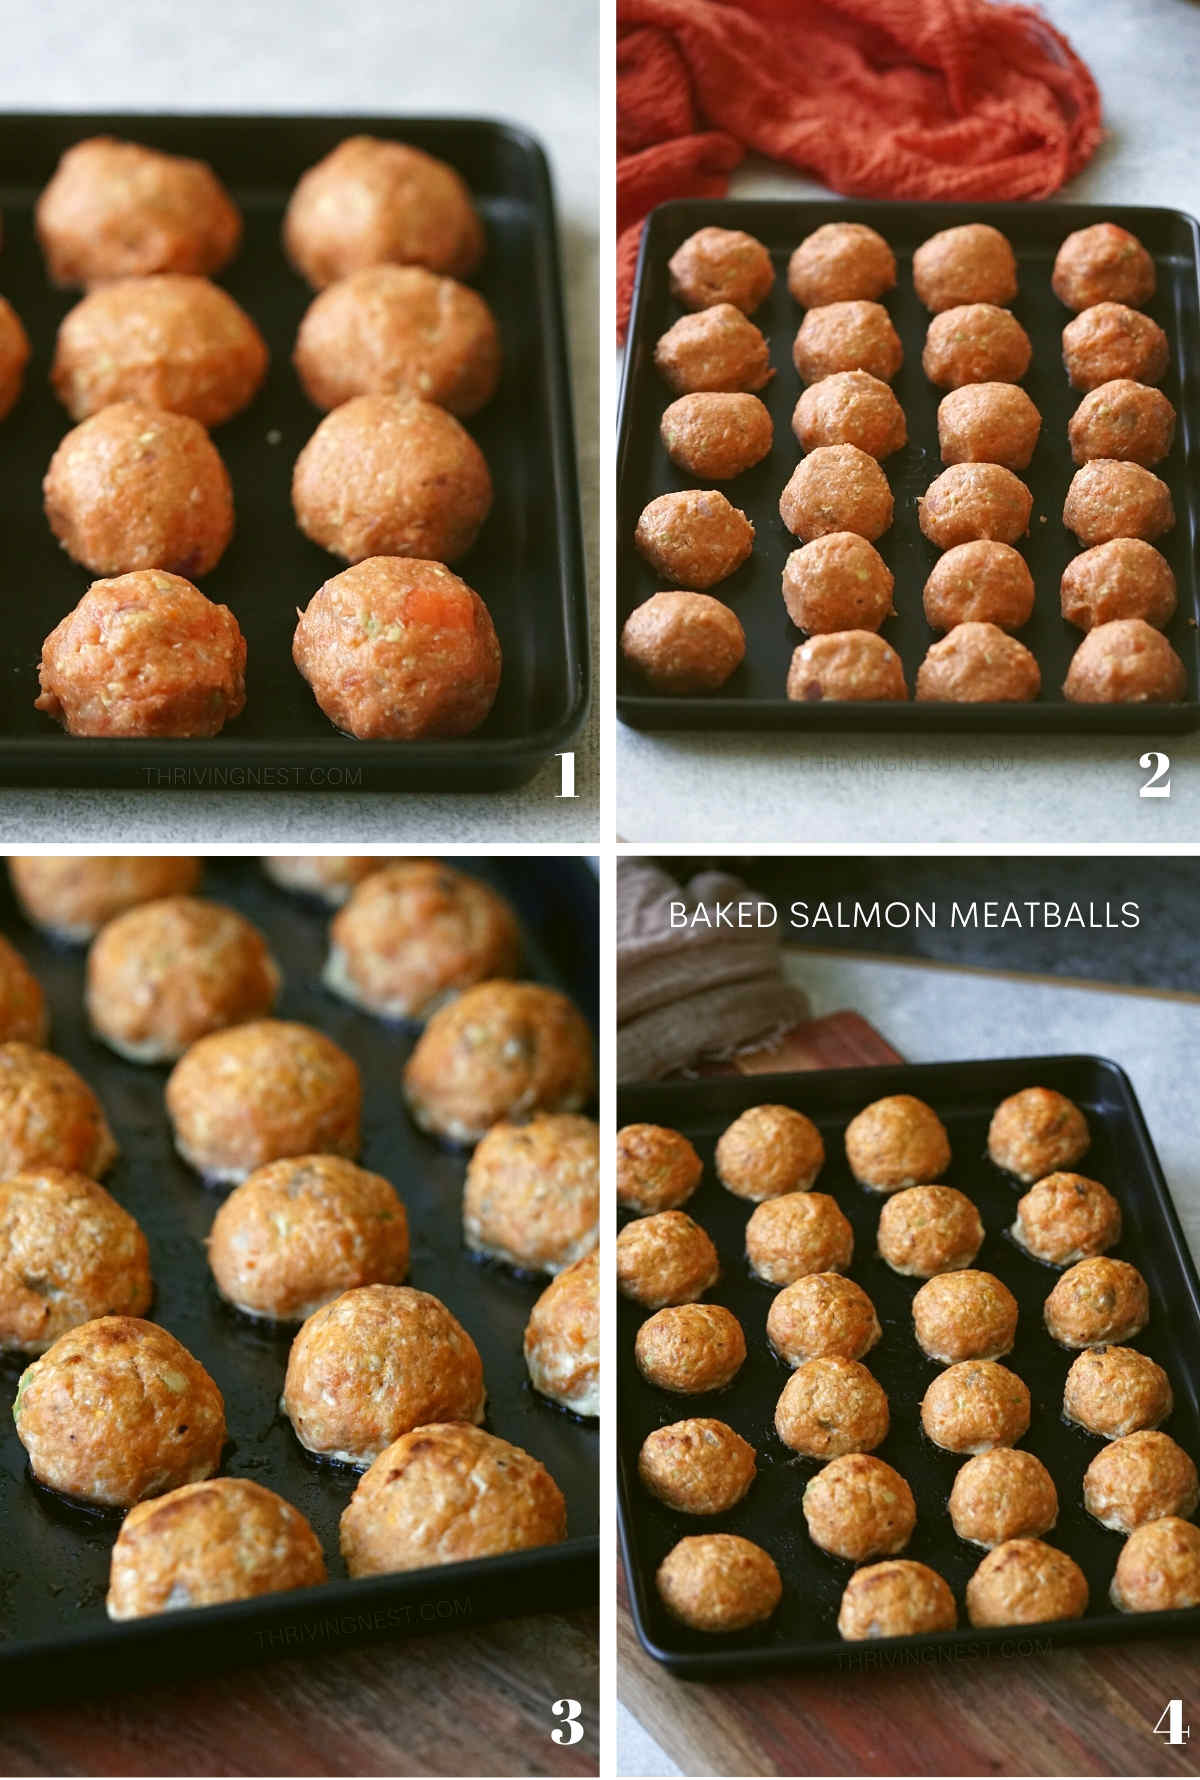 Process shots showing how the salmon balls are made and baked in the pan.